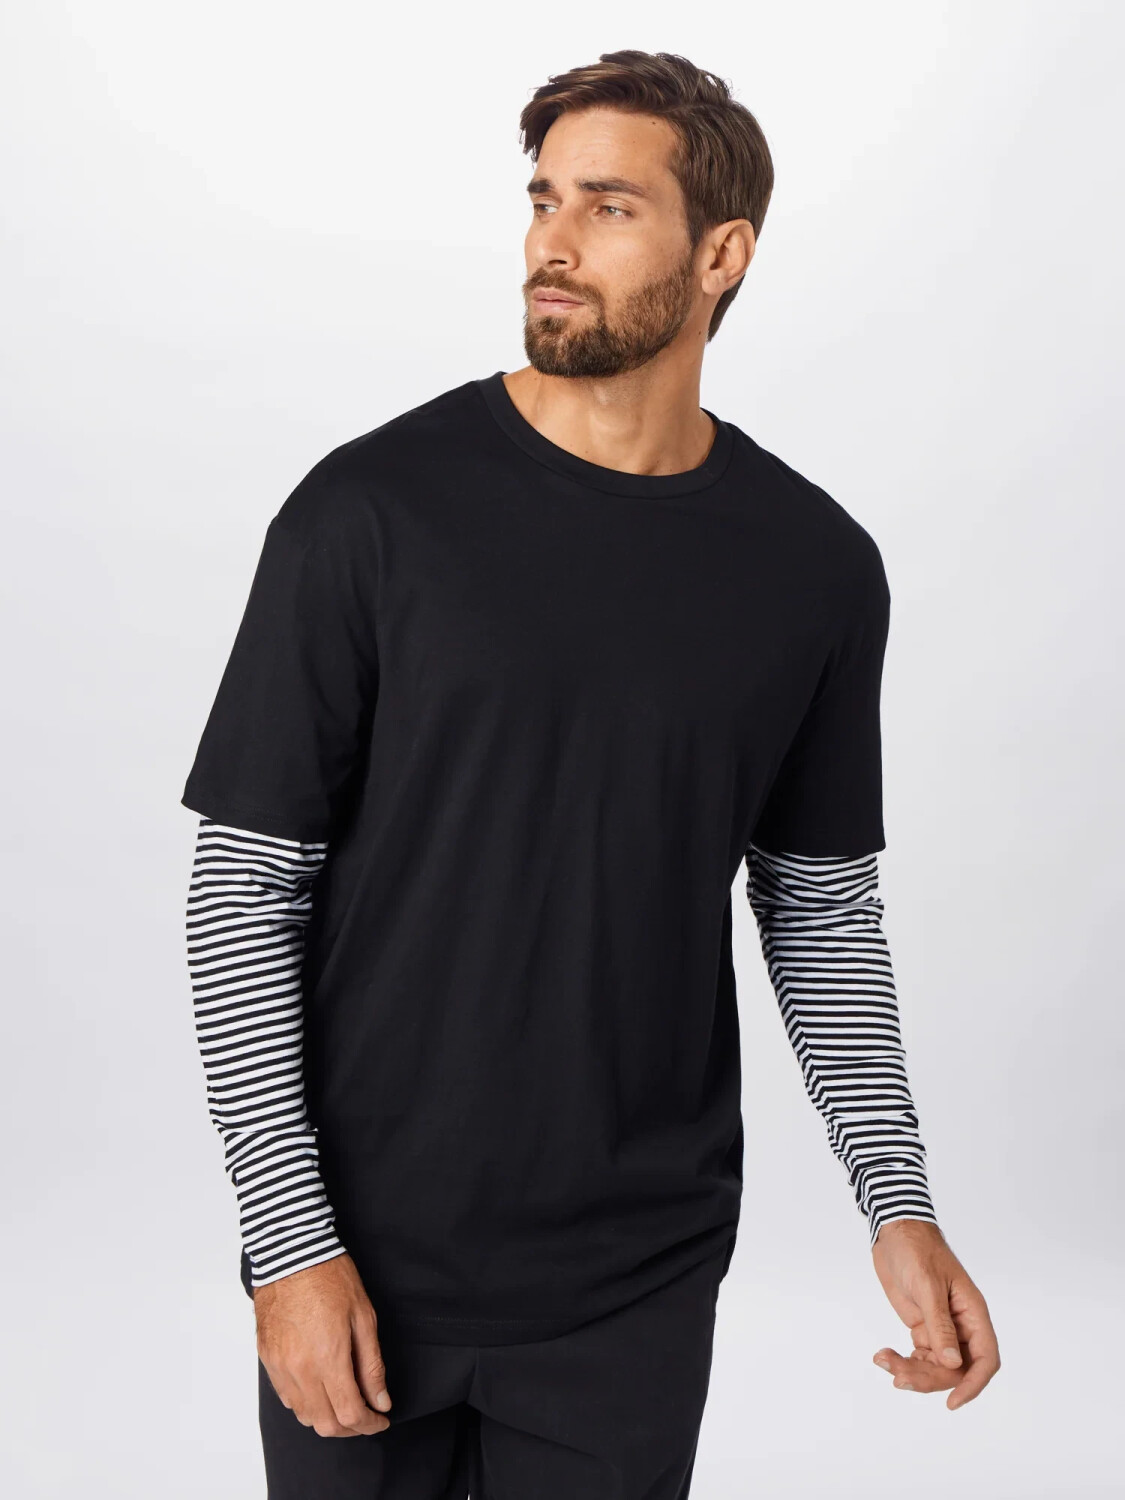 Buy Urban from £11.99 Best Classics – Tee (Today) Double Oversized Deals Layer Striped black on (TB3498) LS